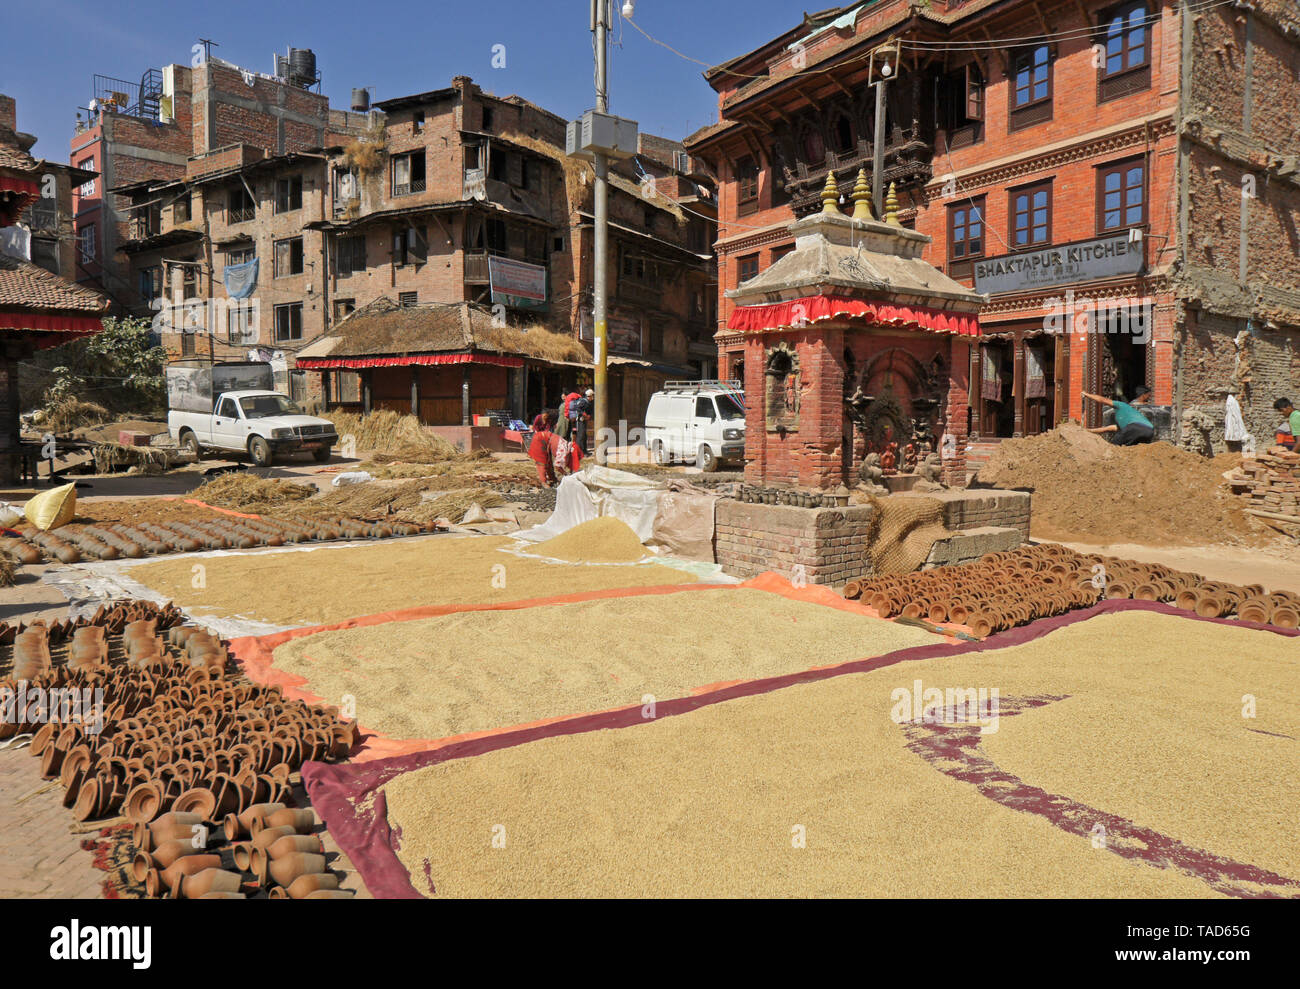 Clay pottery and harvested rice drying in sun next to Hindu shrine in Pottery Square, Bhaktapur, Kathmandu Valley, Nepal Stock Photo